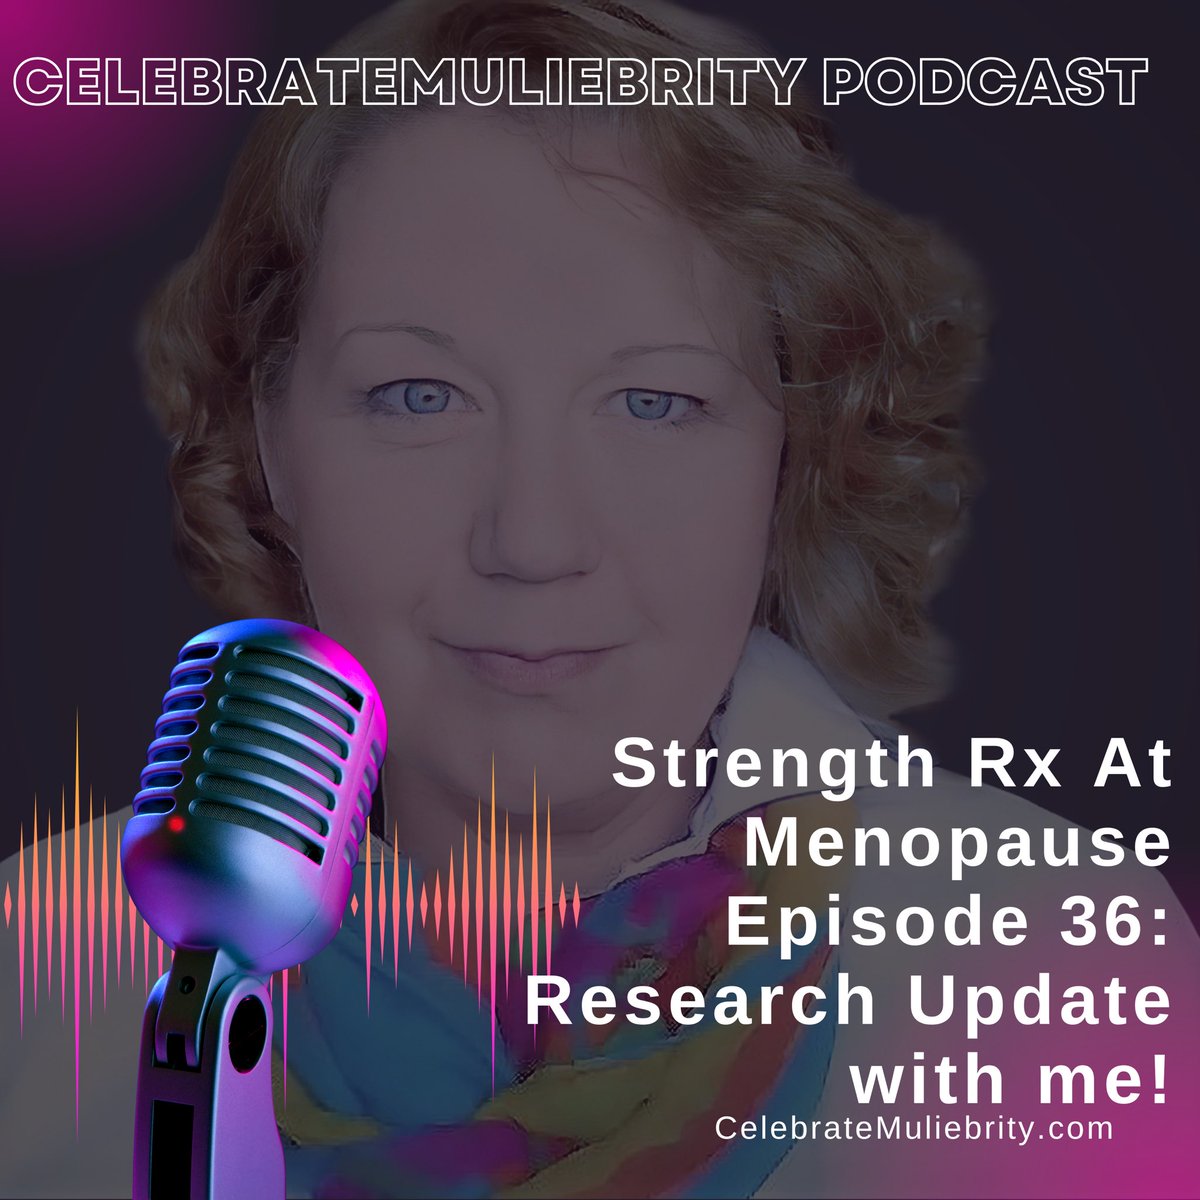 There’s a new episode on the CelebrateMuliebrity Podcast! -I’m flying solo on this one where I’m discussing a new paper looking at barriers to strength training at perimenopause (& what I think we also need to consider) tr.ee/XWjegYj2A0